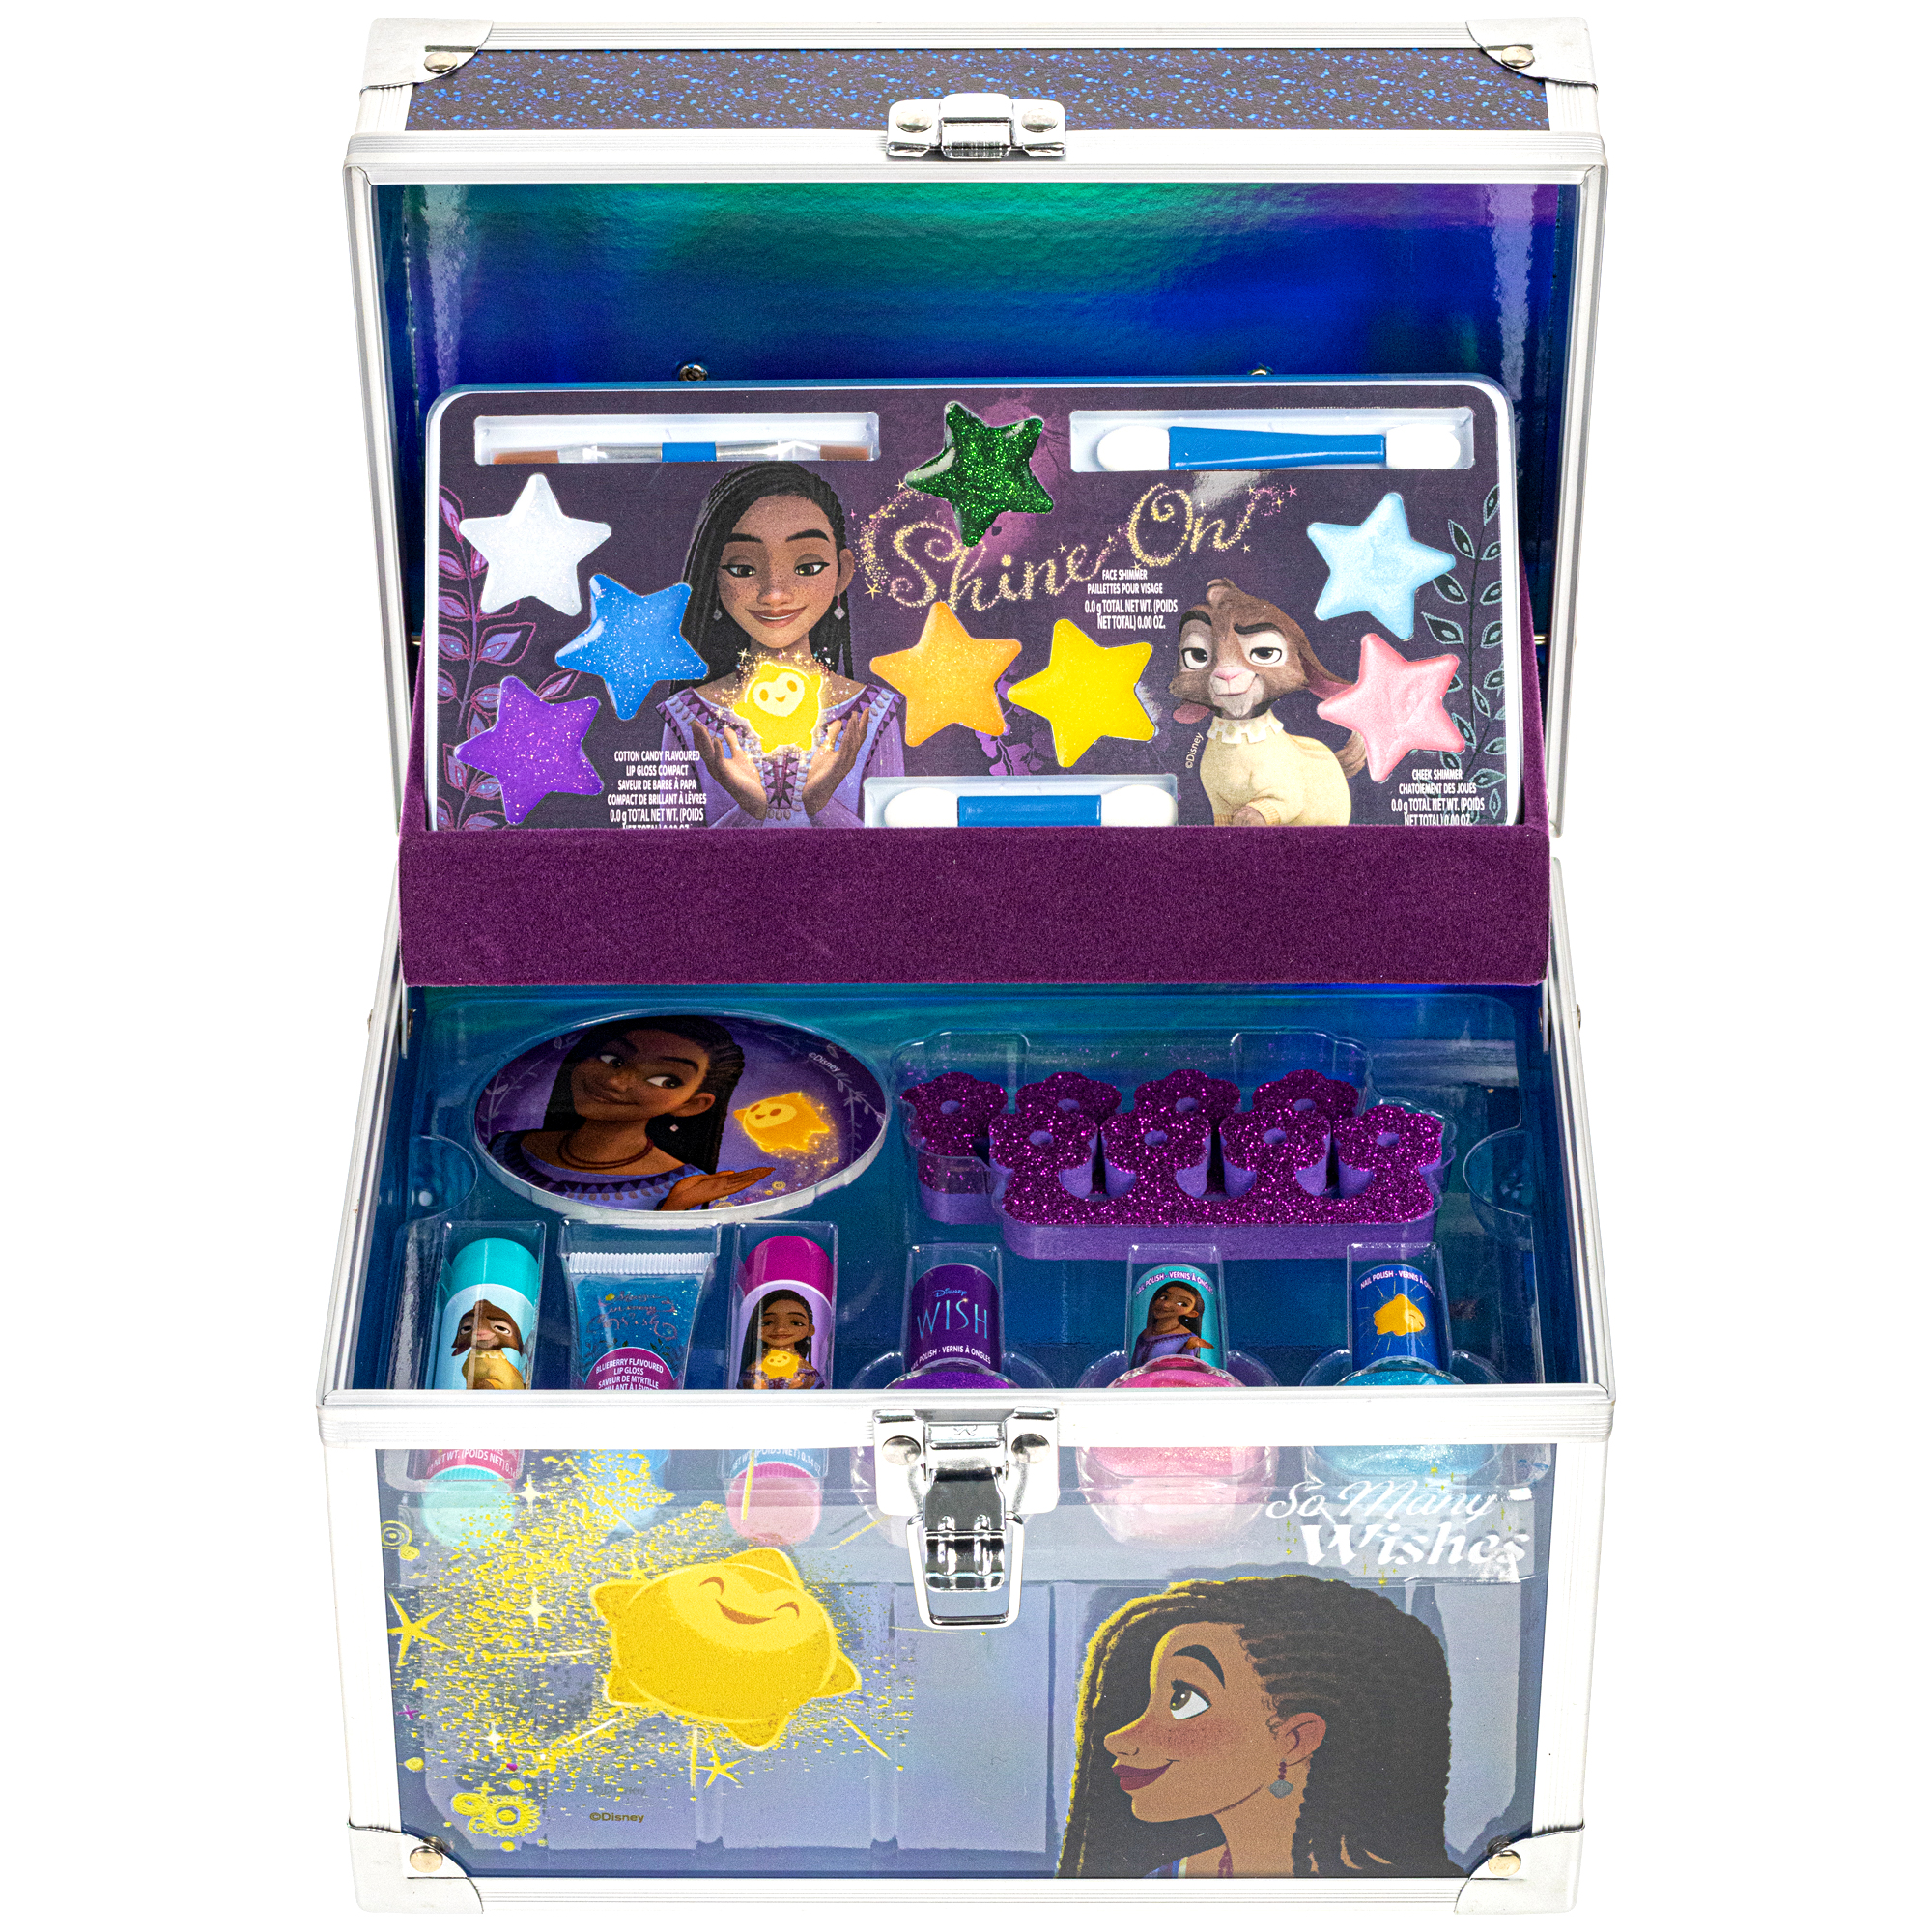 Disney Wish Train Case Pretend Play Cosmetic Set- Kids Beauty, Toy, Gift for Girls, Ages 3+ by Townley Girl - image 1 of 9